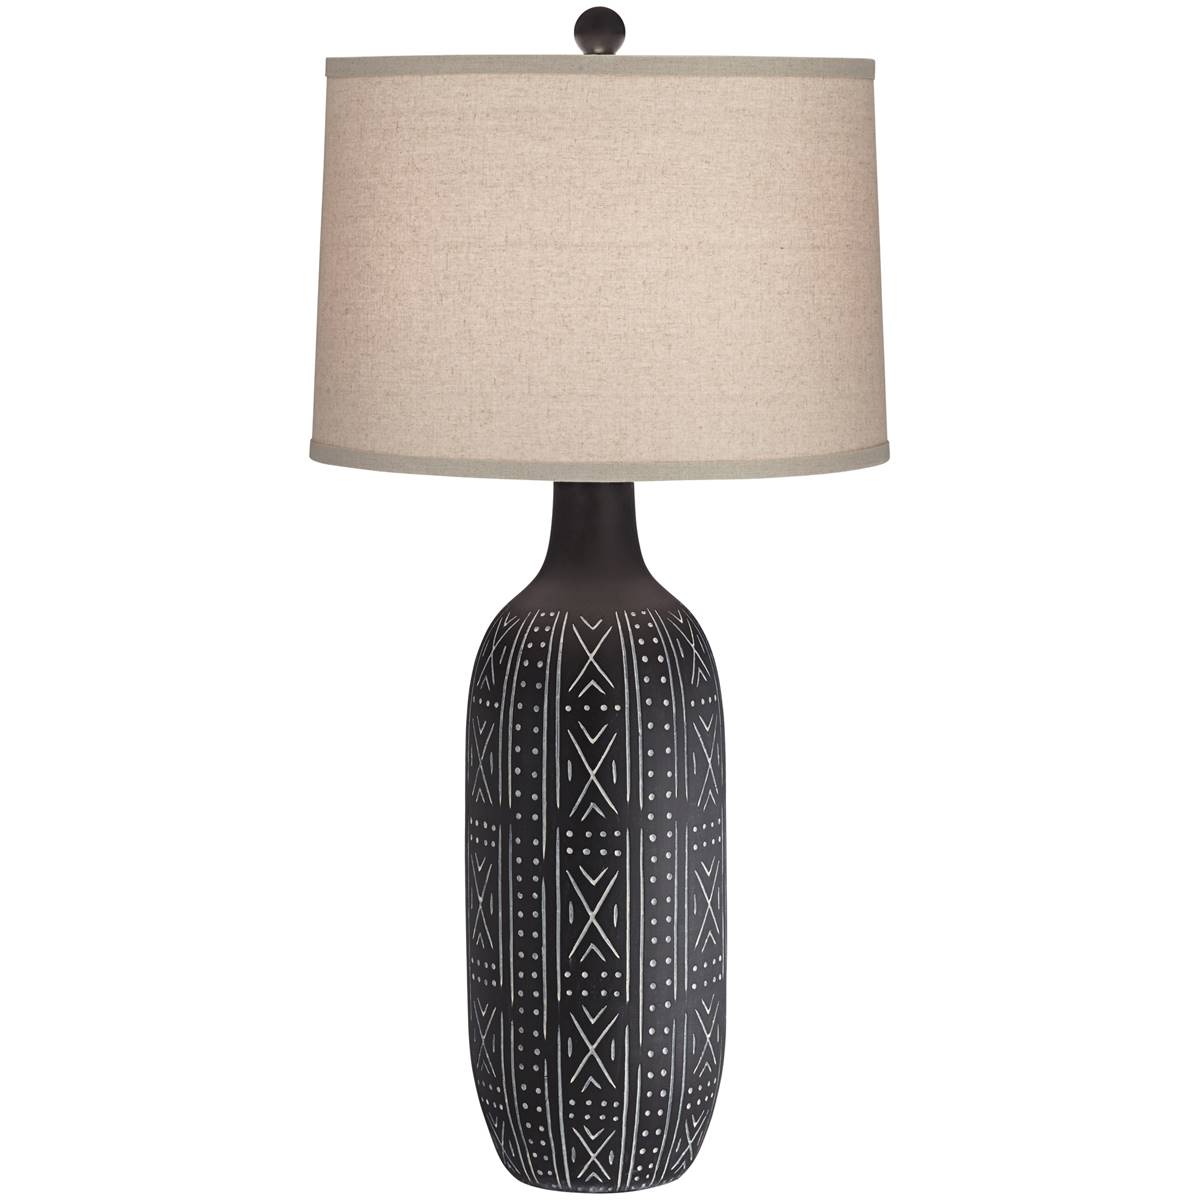 Pacific Coast Lighting Blackwater 32in. Charcoal Table Lamp